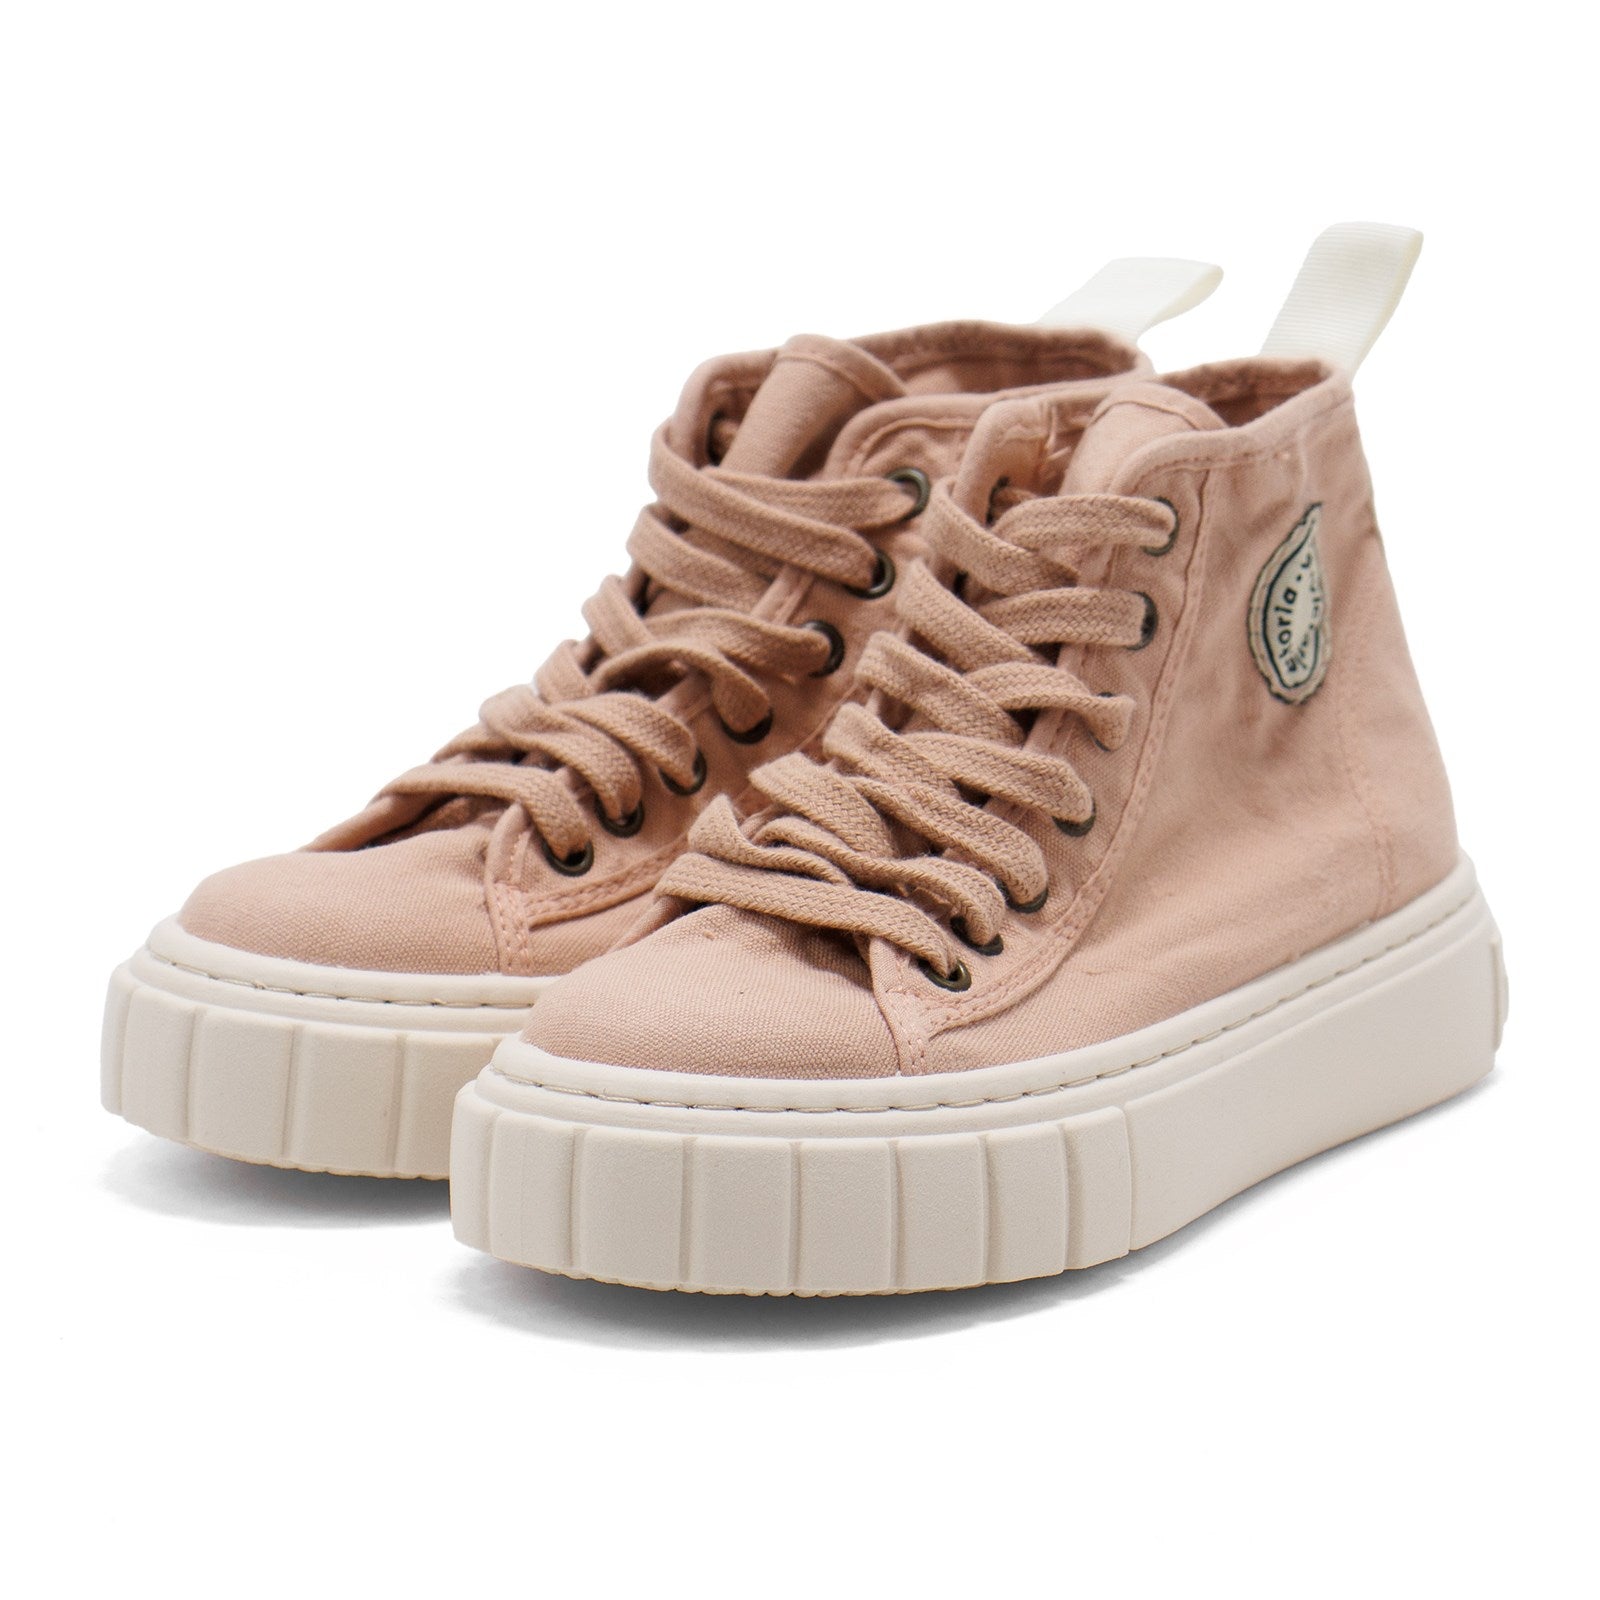 Victoria Girl Abril Ankle Sneakers